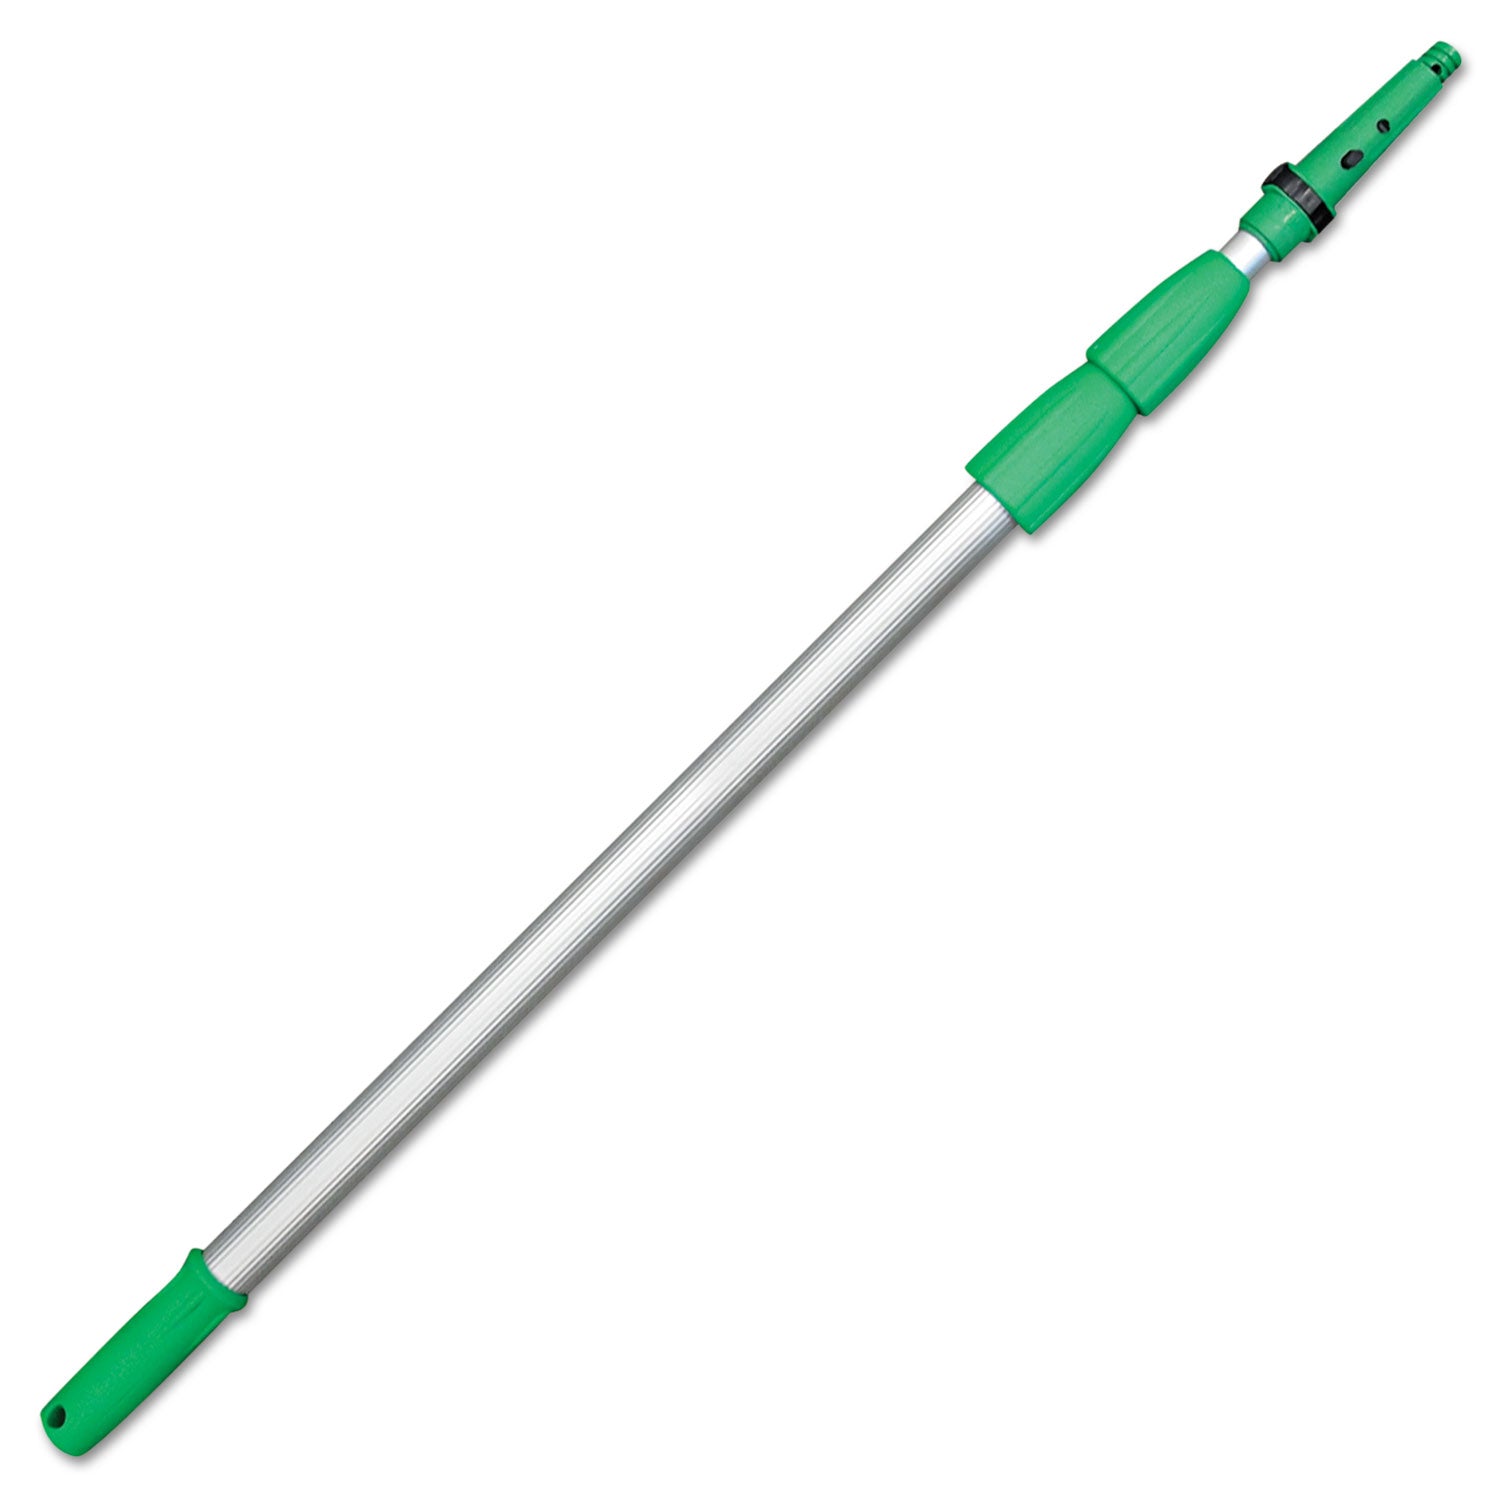 Opti-Loc Extension Pole, 30 ft, Three Sections, Green/Silver - 